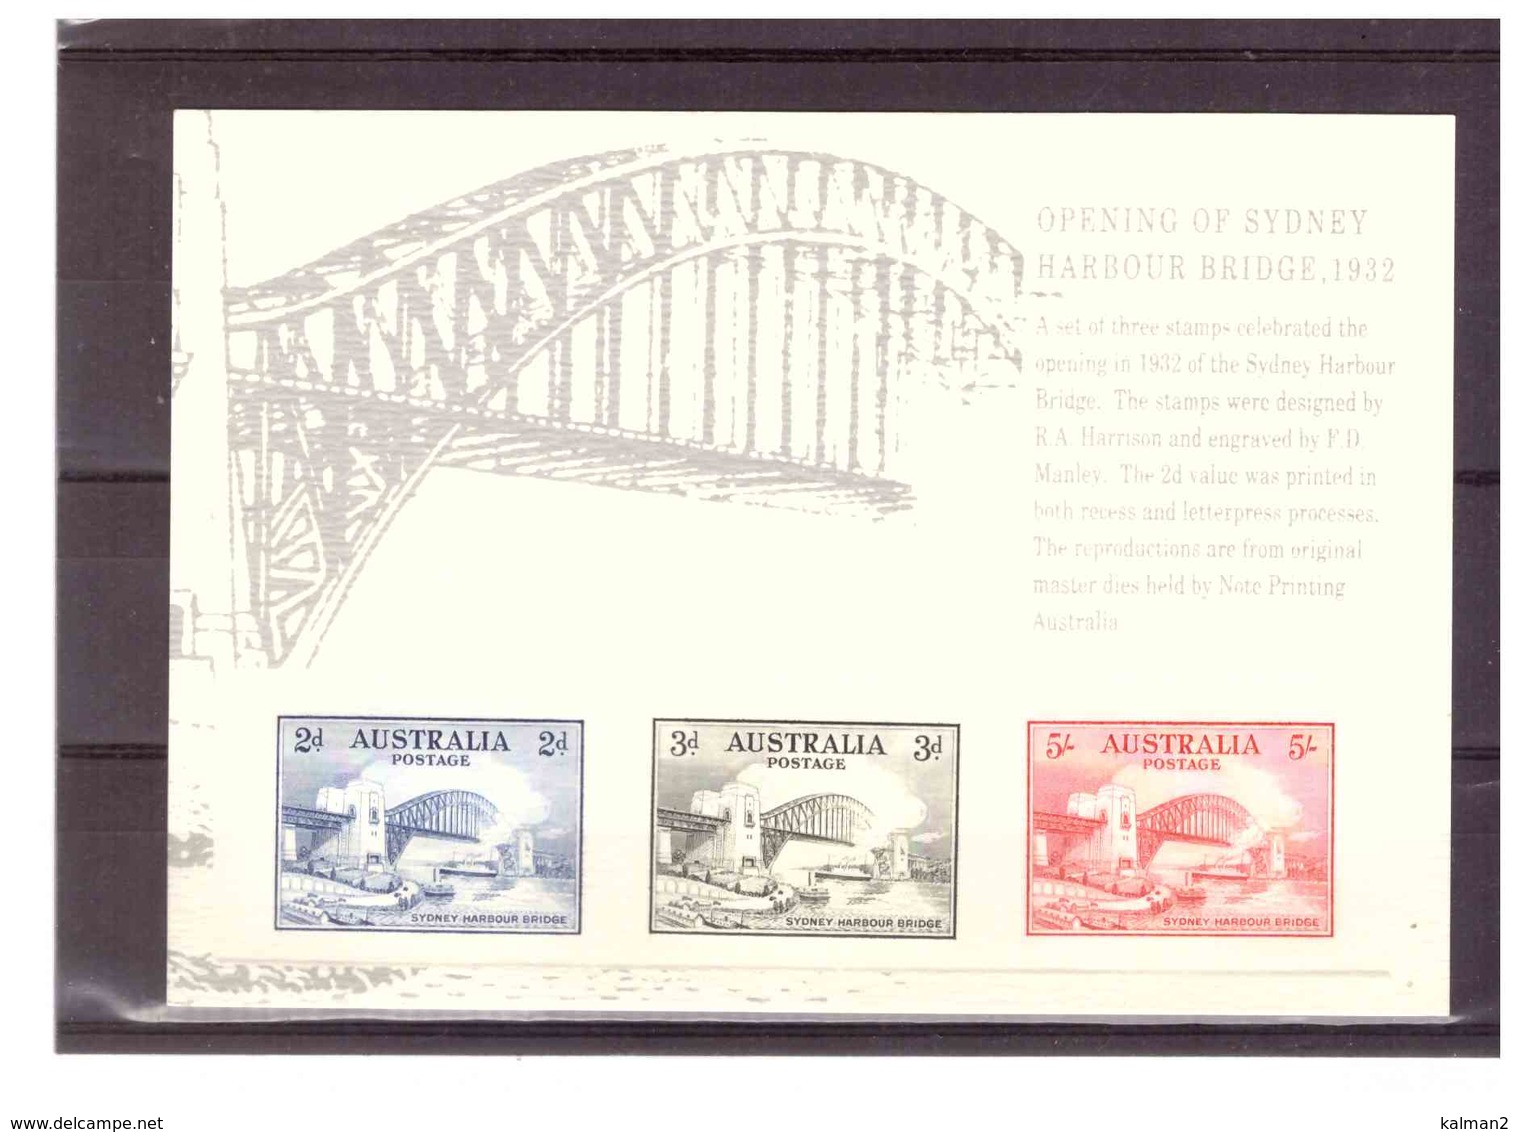 STAMP REPLICA CARD NO. 23 -  19.2.1992    /    1932   OPENING OF SYDNEY HARBOUR BRIDGE - Proofs & Reprints